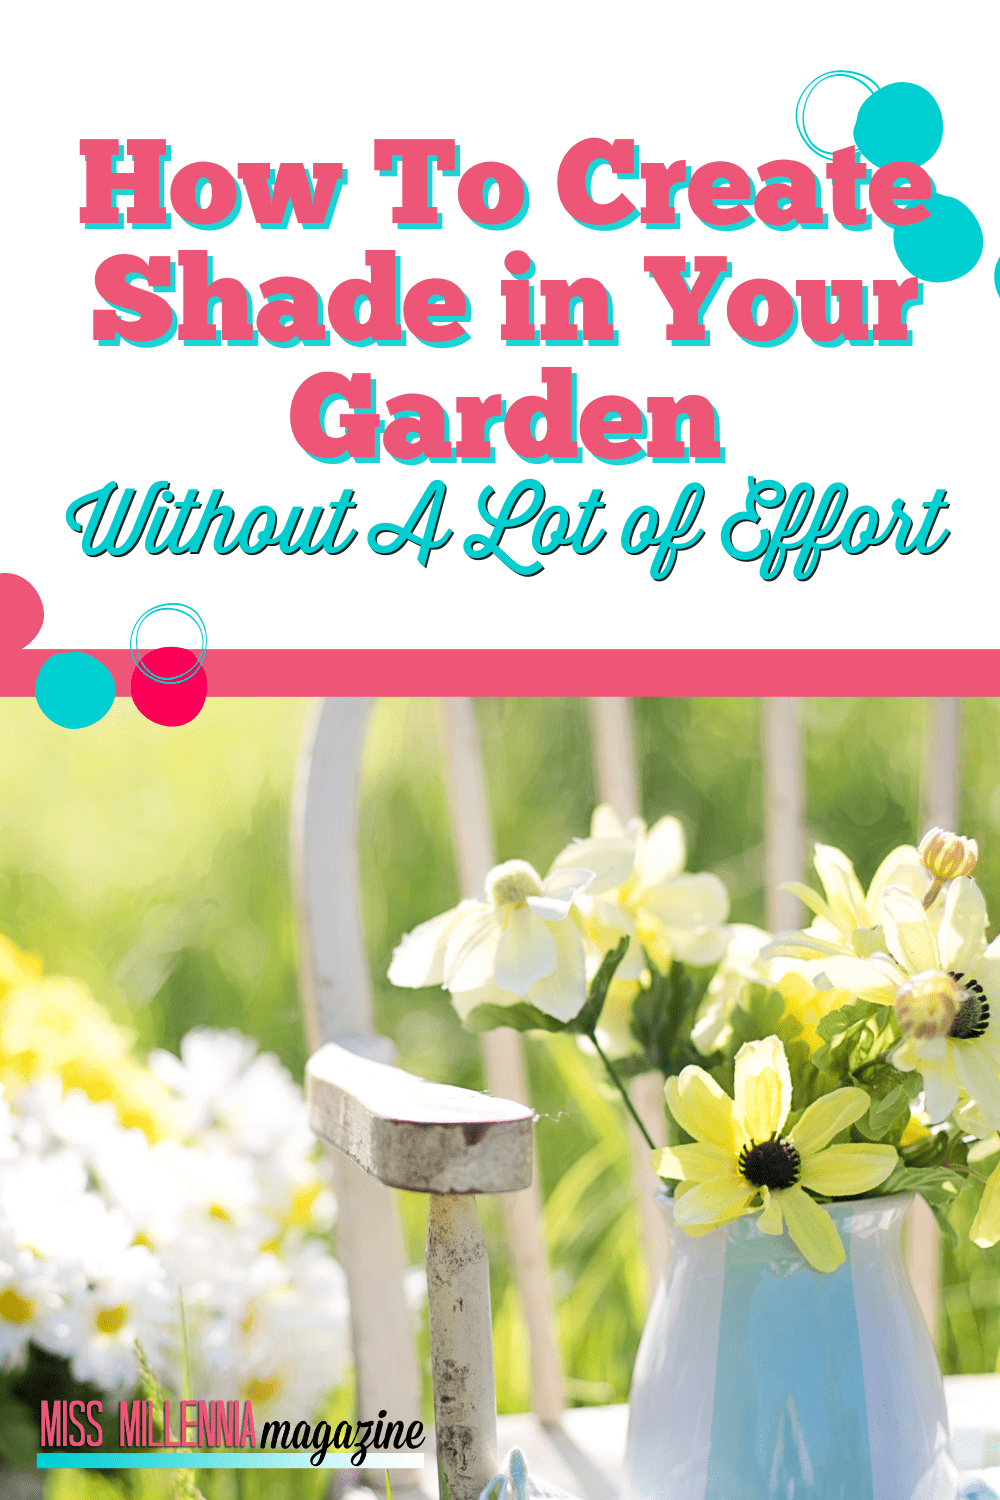 How To Create Shade in Your Garden Without A Lot of Effort